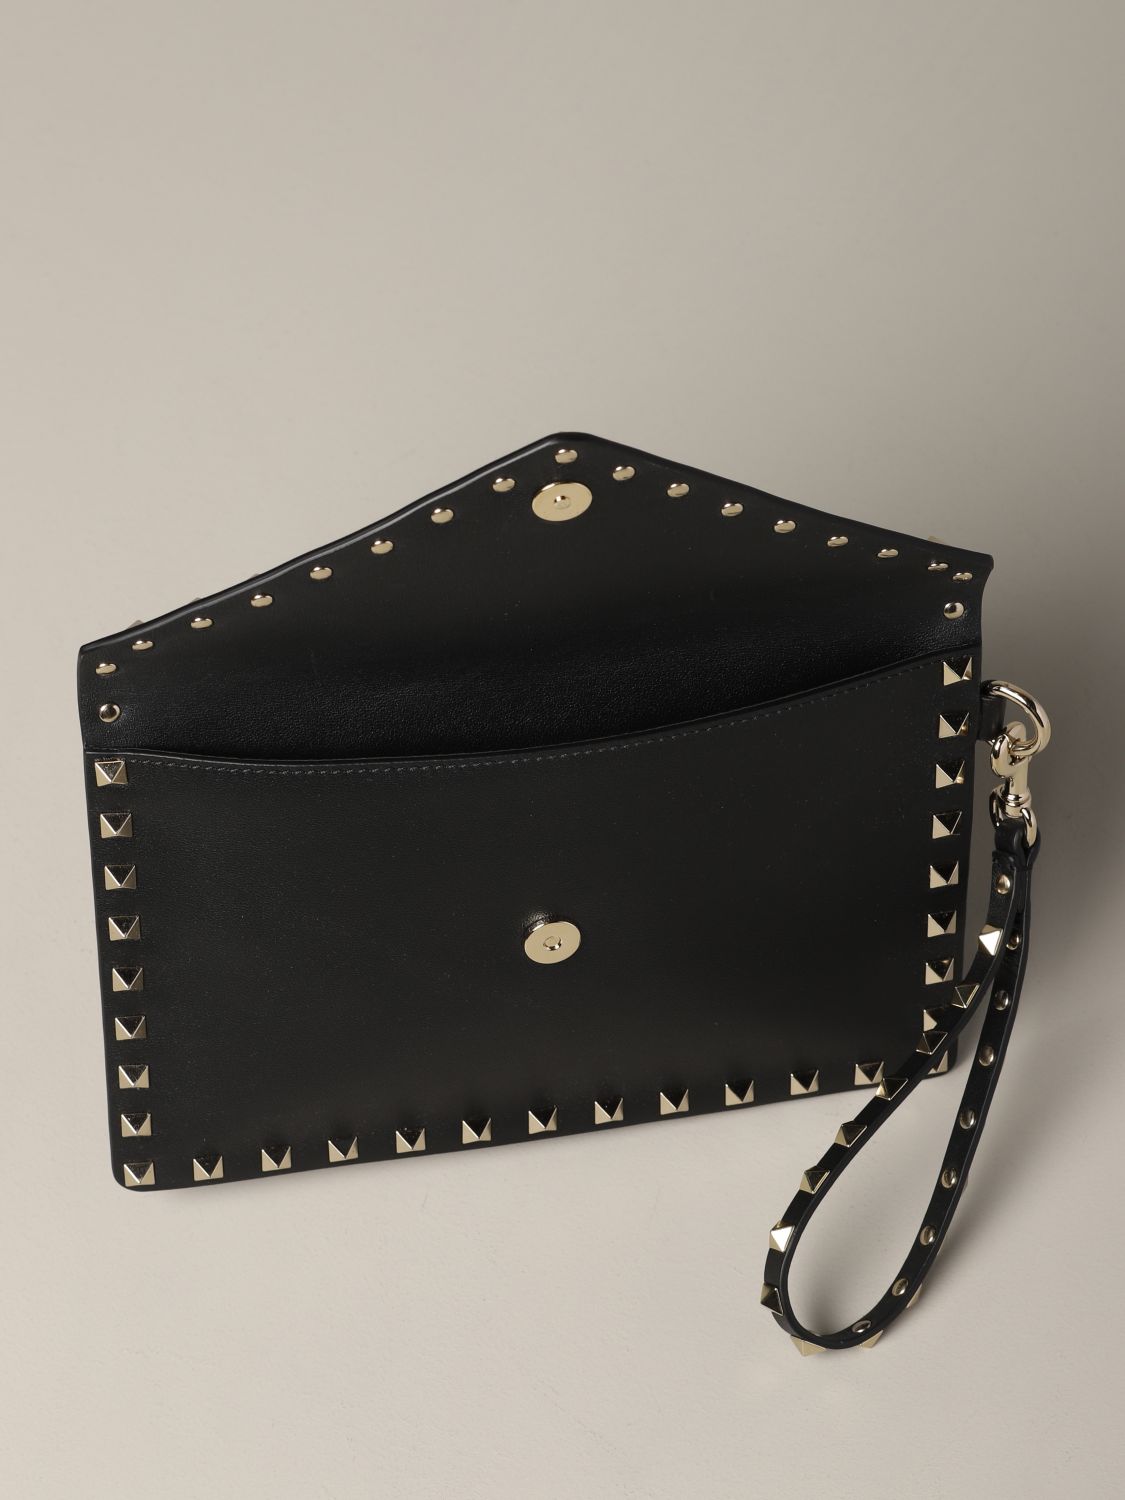 Valentino Garavani Outlet: leather clutch bag with studs | Clutch ...